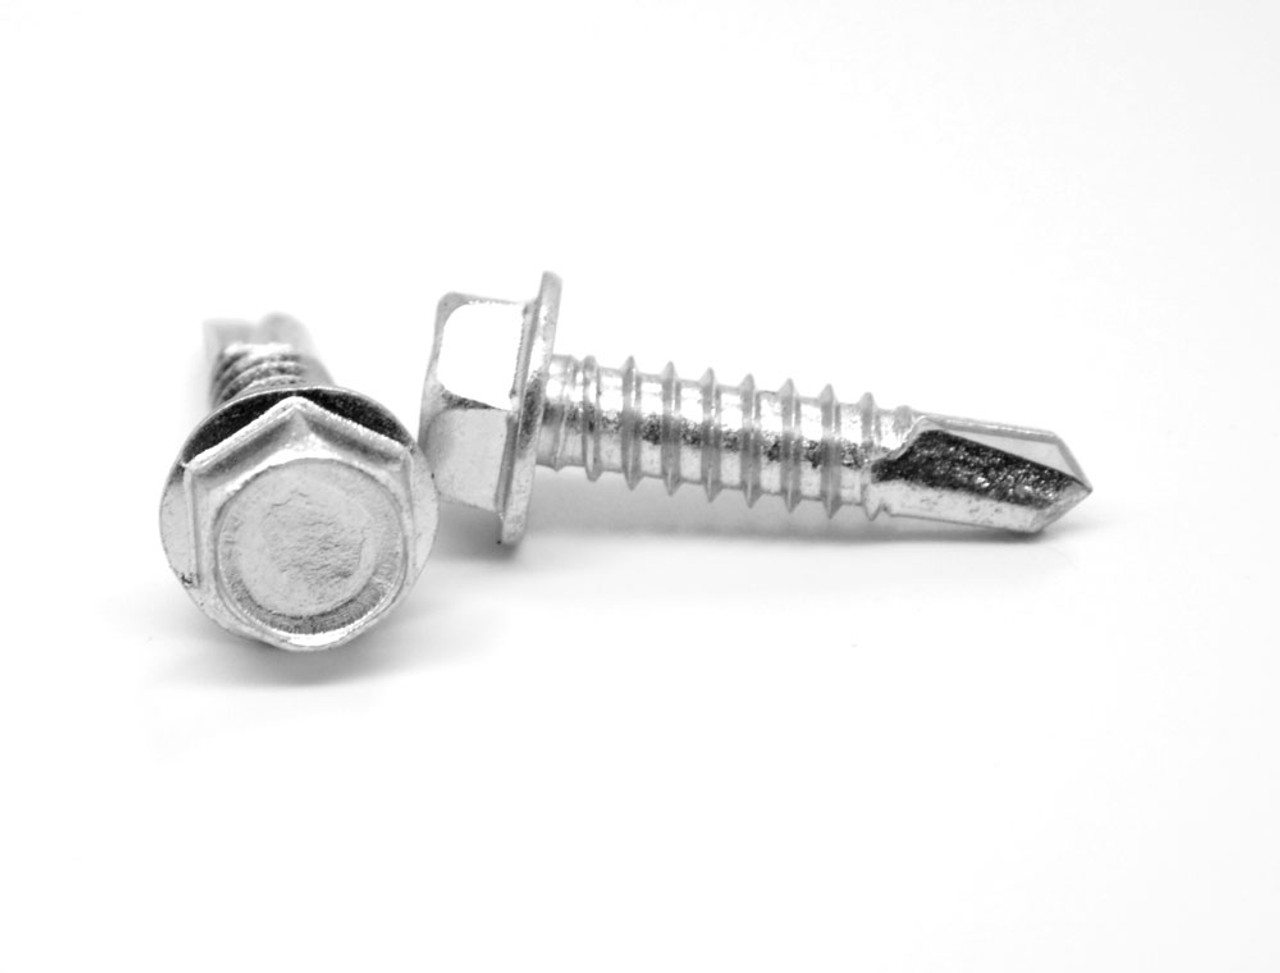 #12-14 x 2" (FT) Self Drilling Screw Hex Washer Head #3 Point Stainless Steel 410